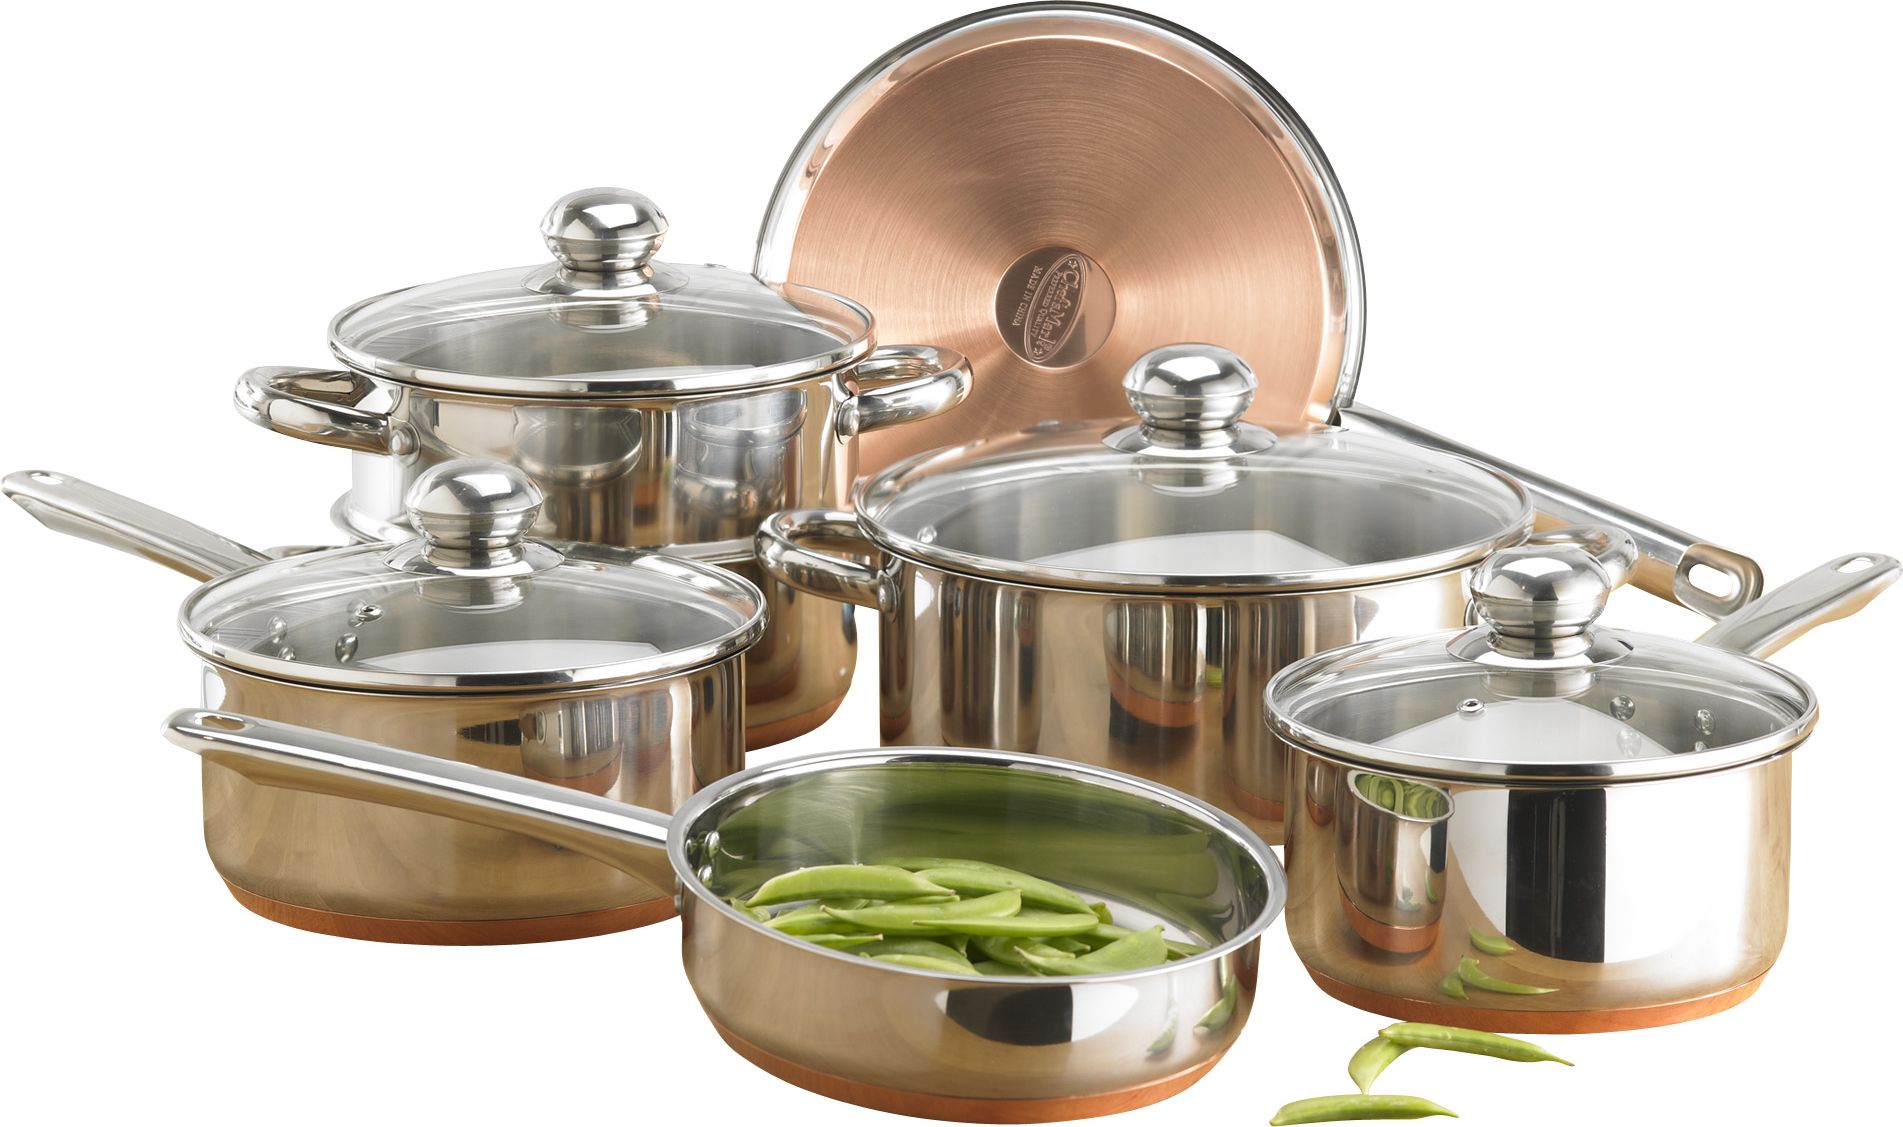 NEW】WMF FUNCTION 4, 8PC STAINLESS STEEL COOKWARE SET